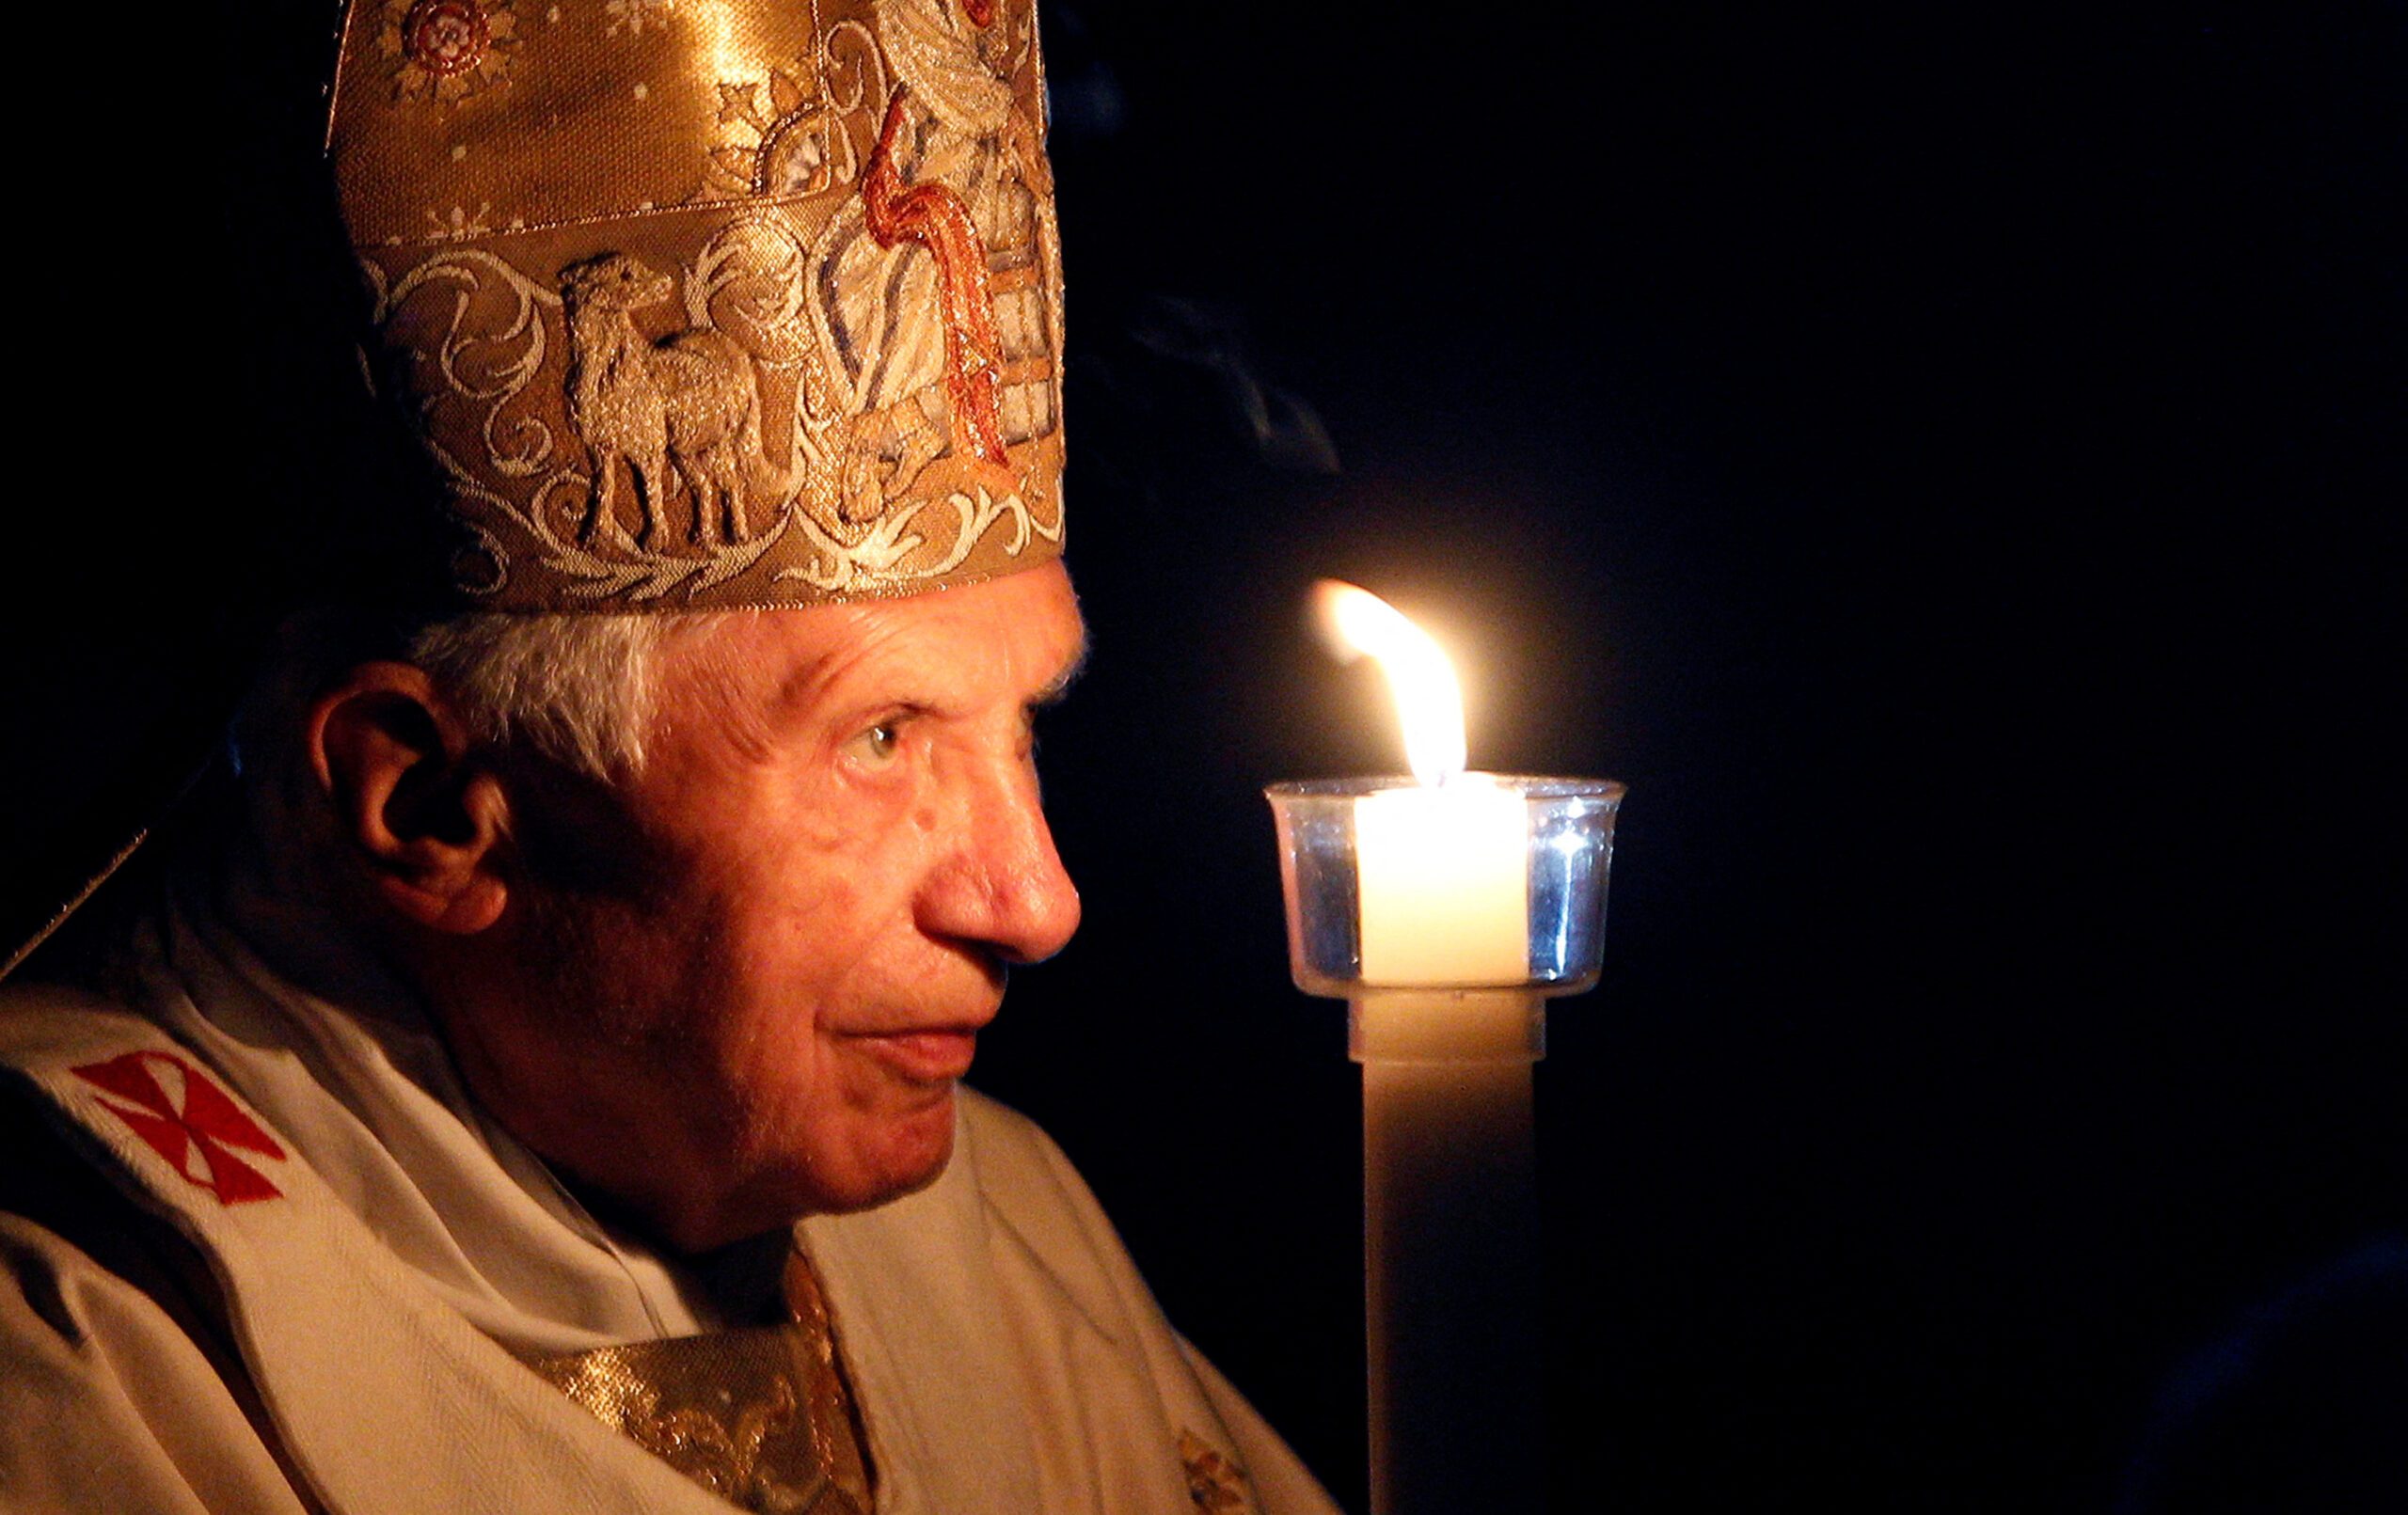 Pope Benedict XVI: A man at odds with the modern world who leaves a legacy of intellectual brilliance and controversy